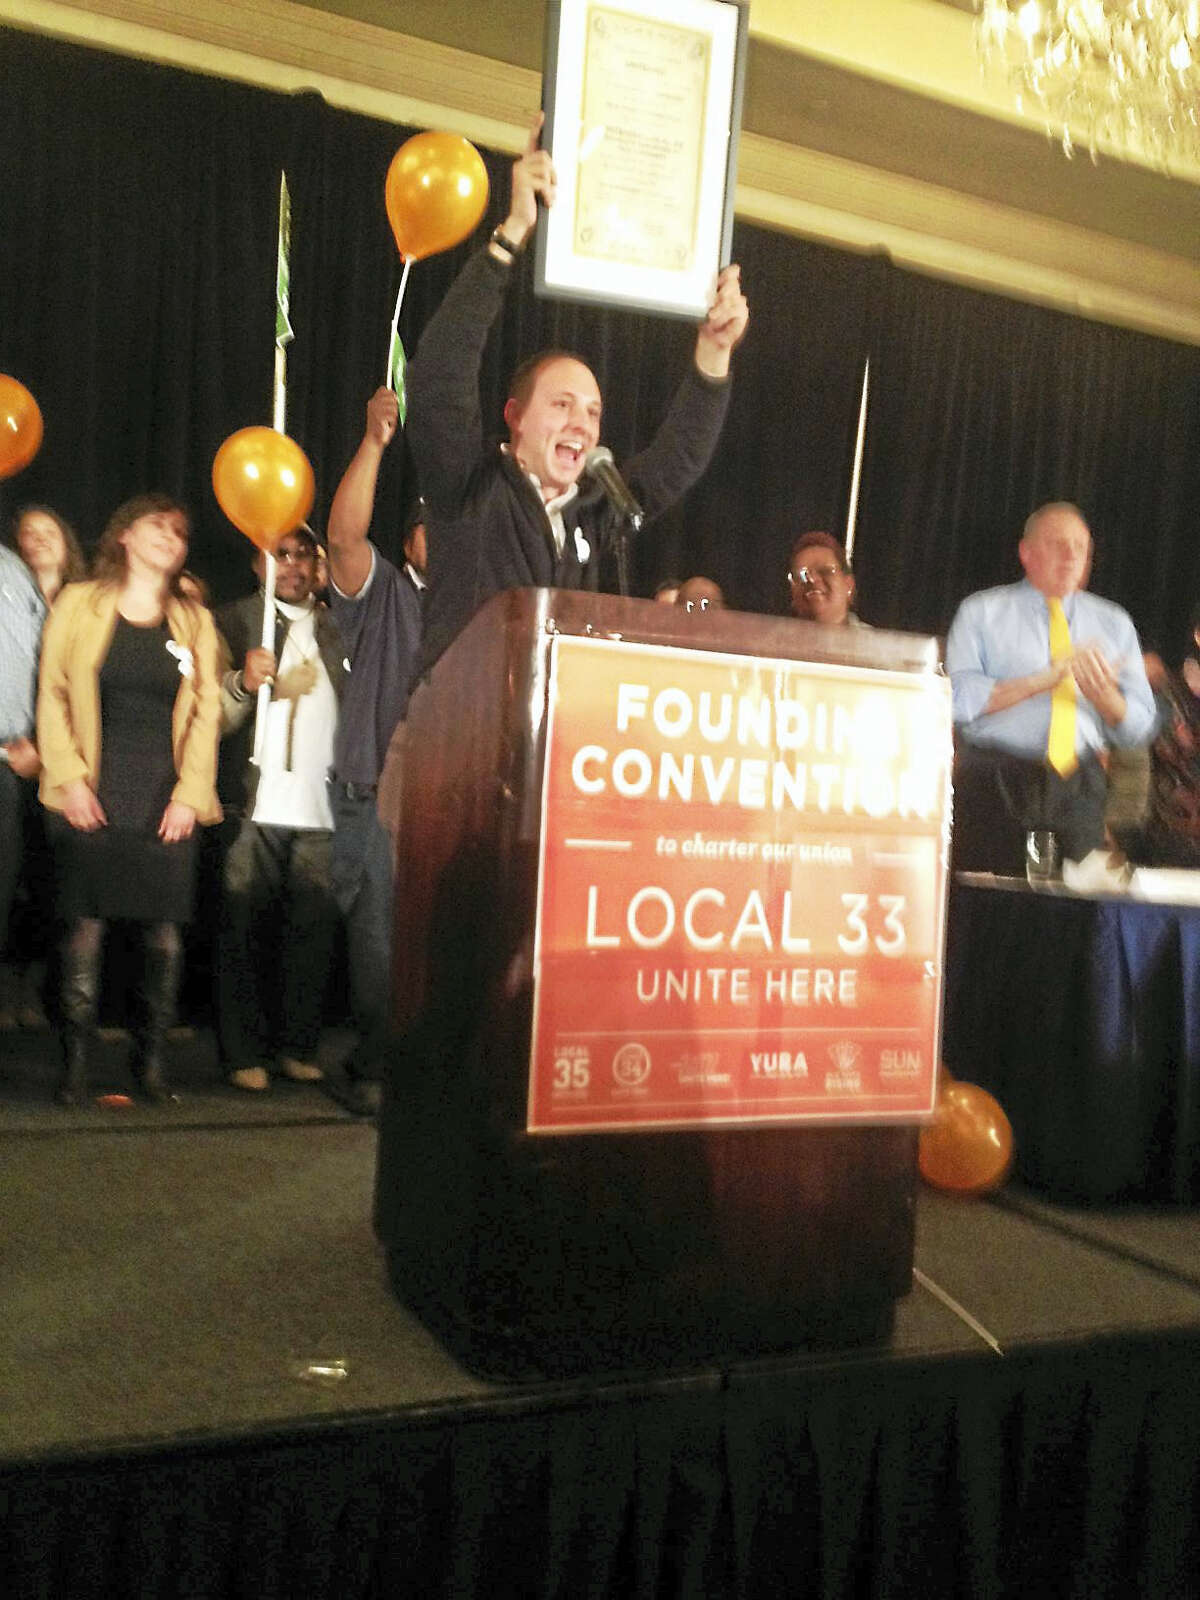 Aaron Greenberg, who headed the organizing committee for Graduate Employees and Students Organization, holds up charter for Local 33 at its founding convention.